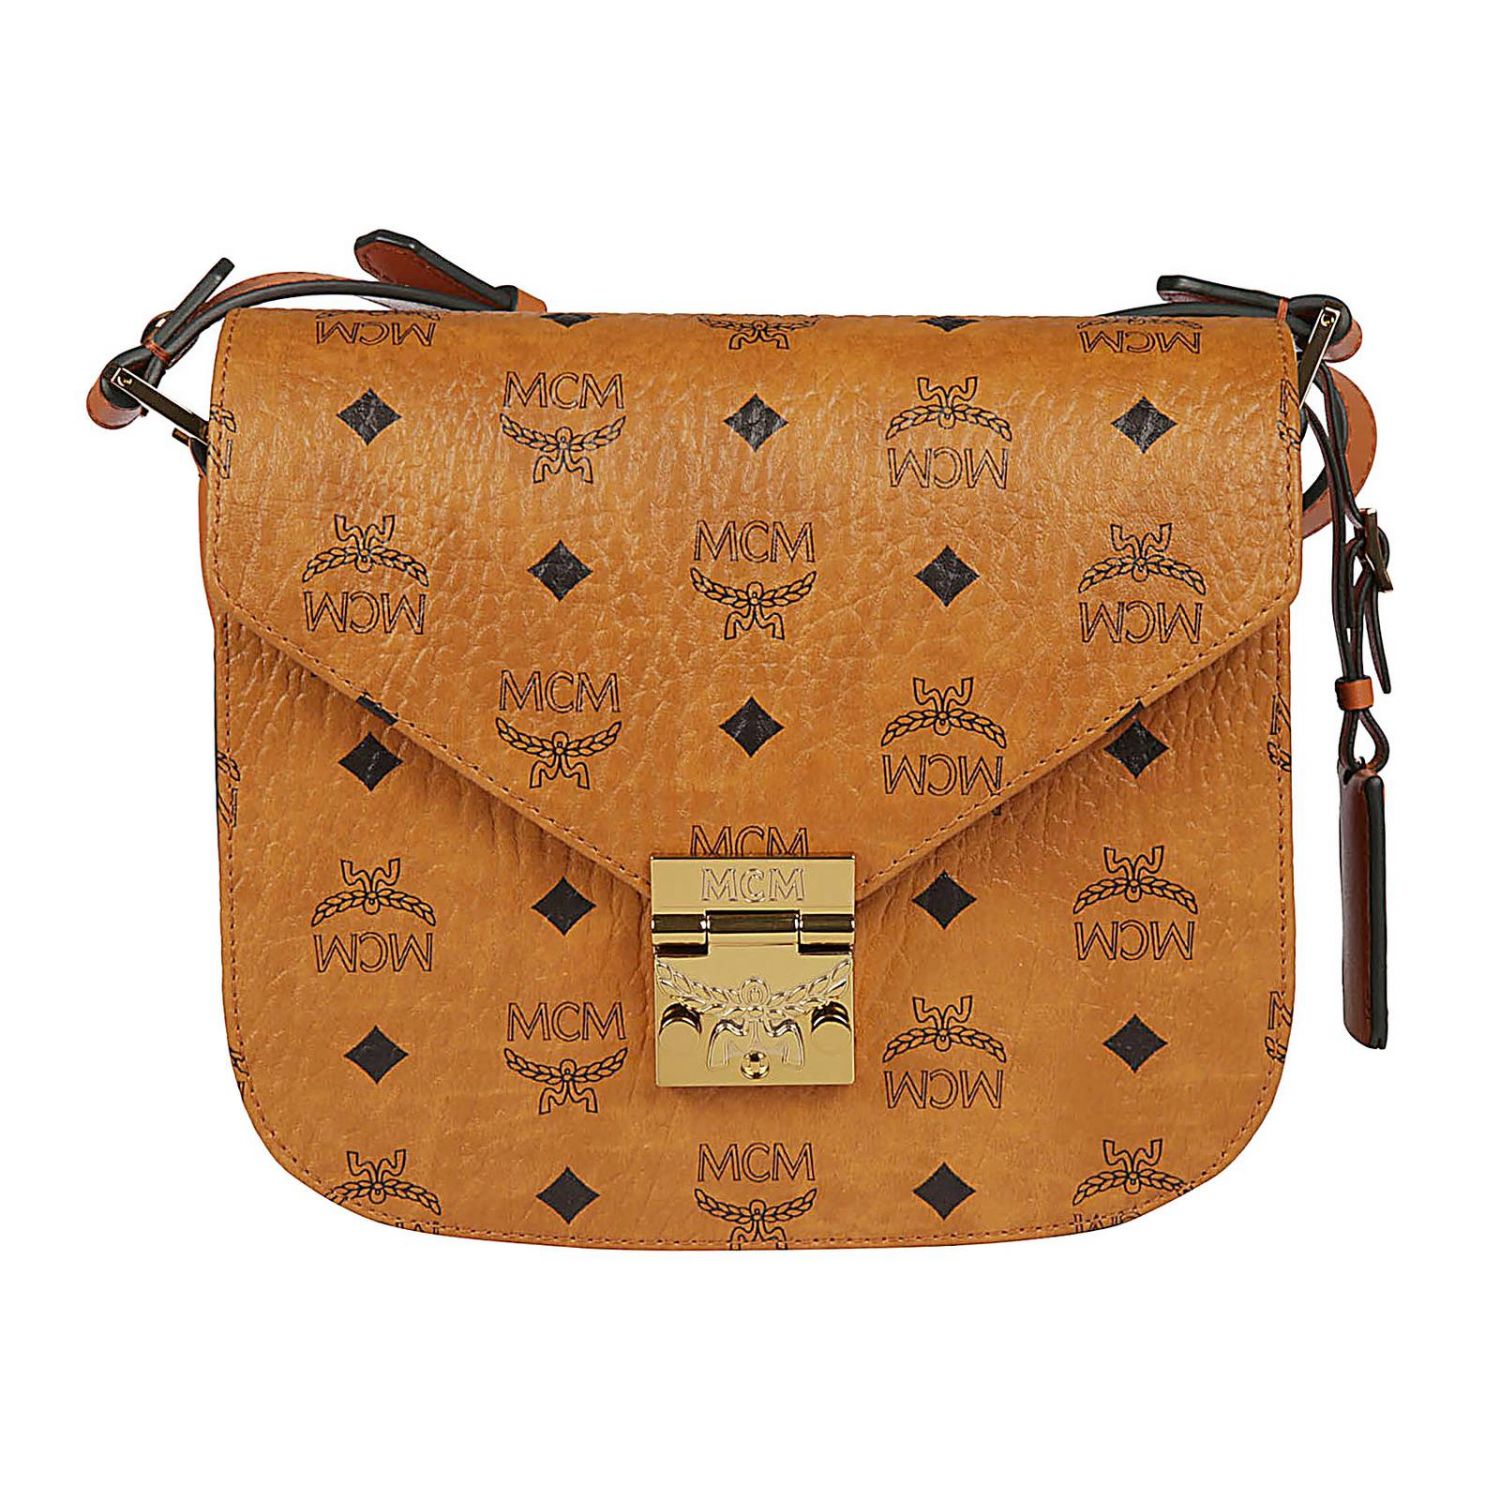 Mcm Outlet: crossbody bags for woman - Beige | Mcm crossbody bags ...